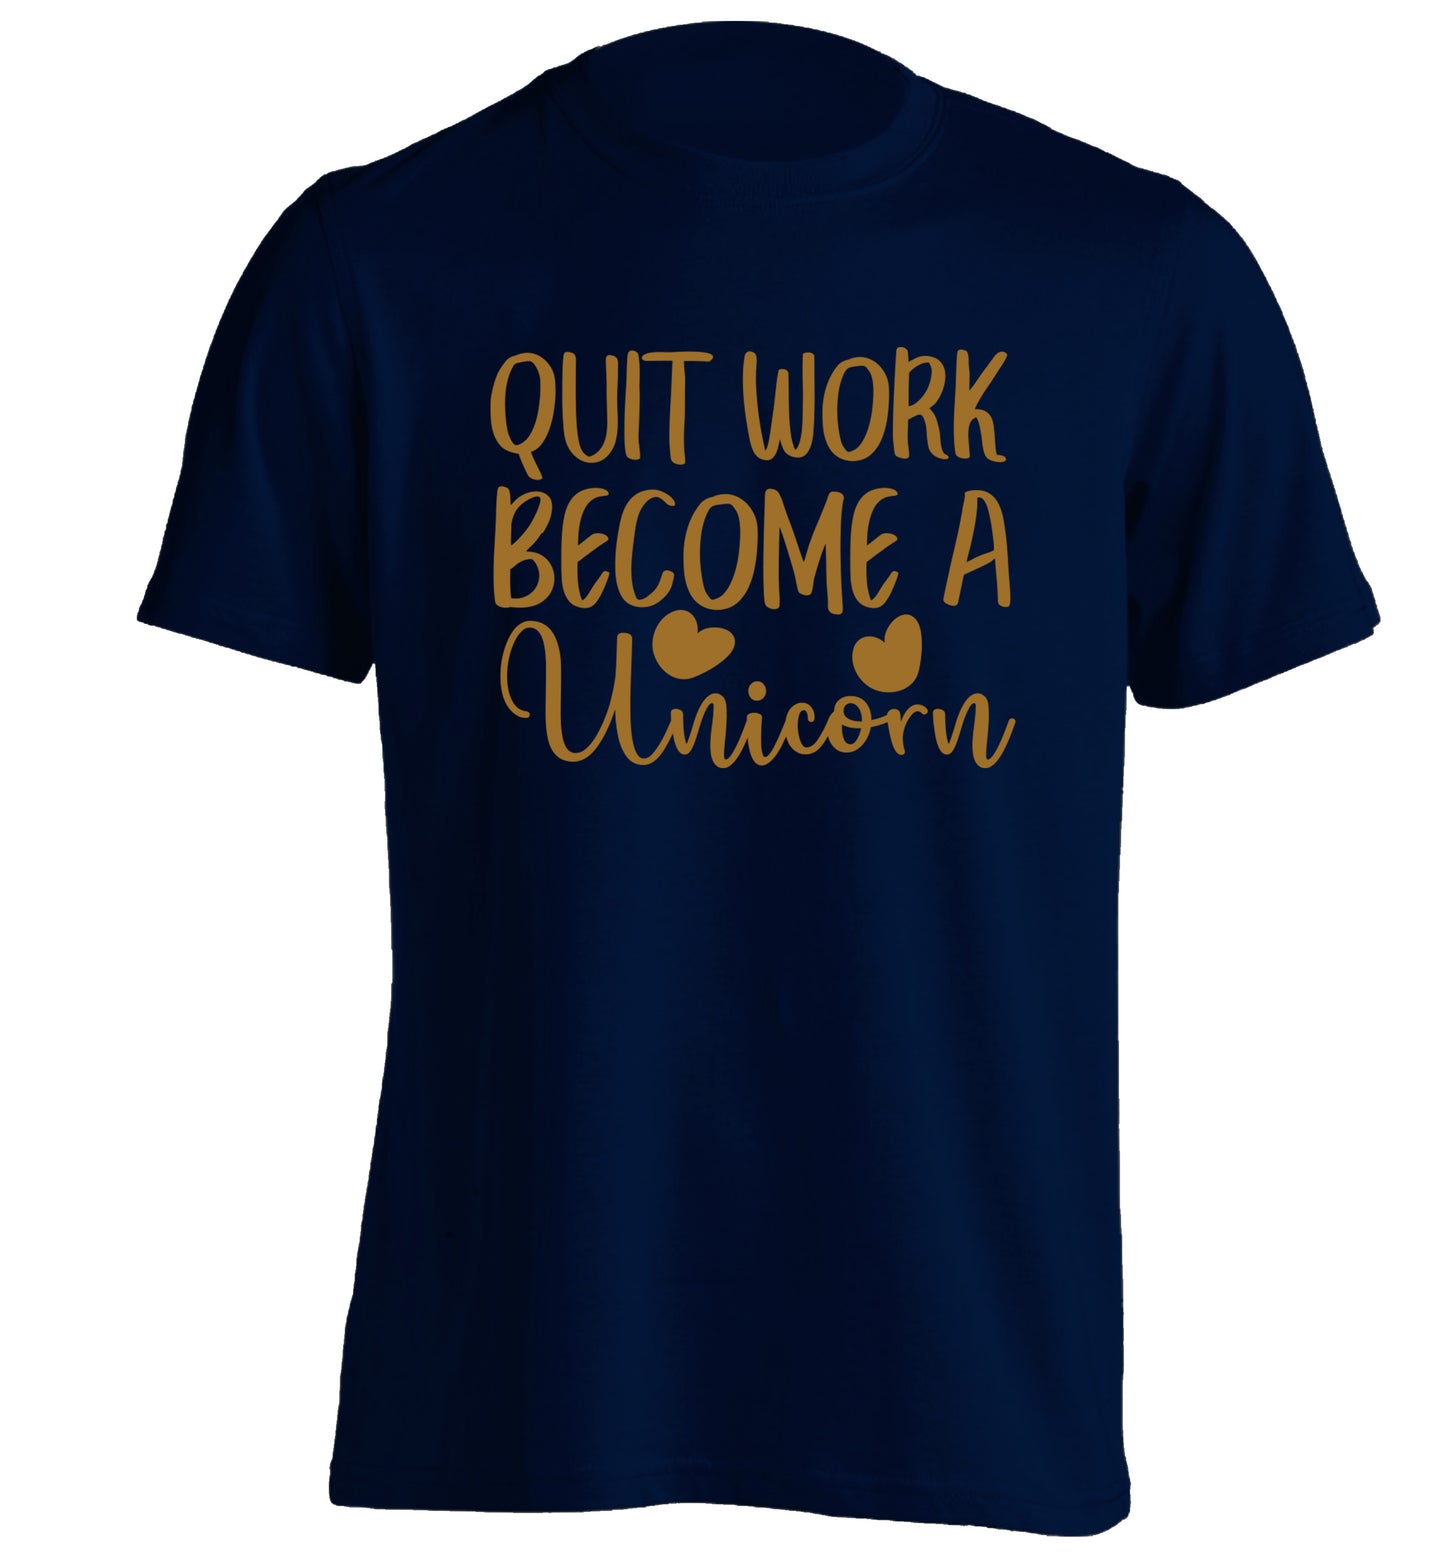 Quit work become a unicorn adults unisex navy Tshirt 2XL